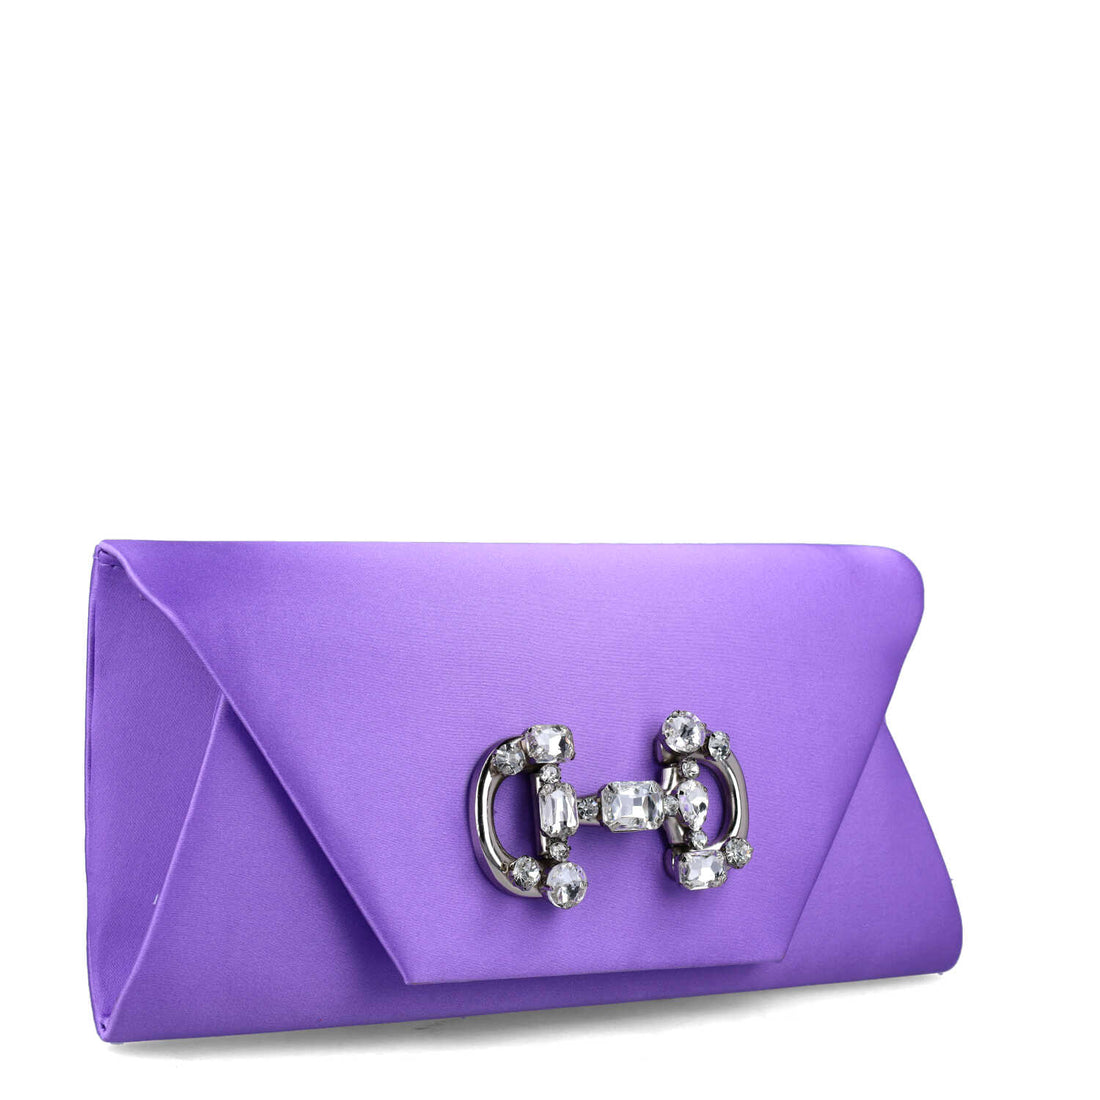 Orchid Evening Bag